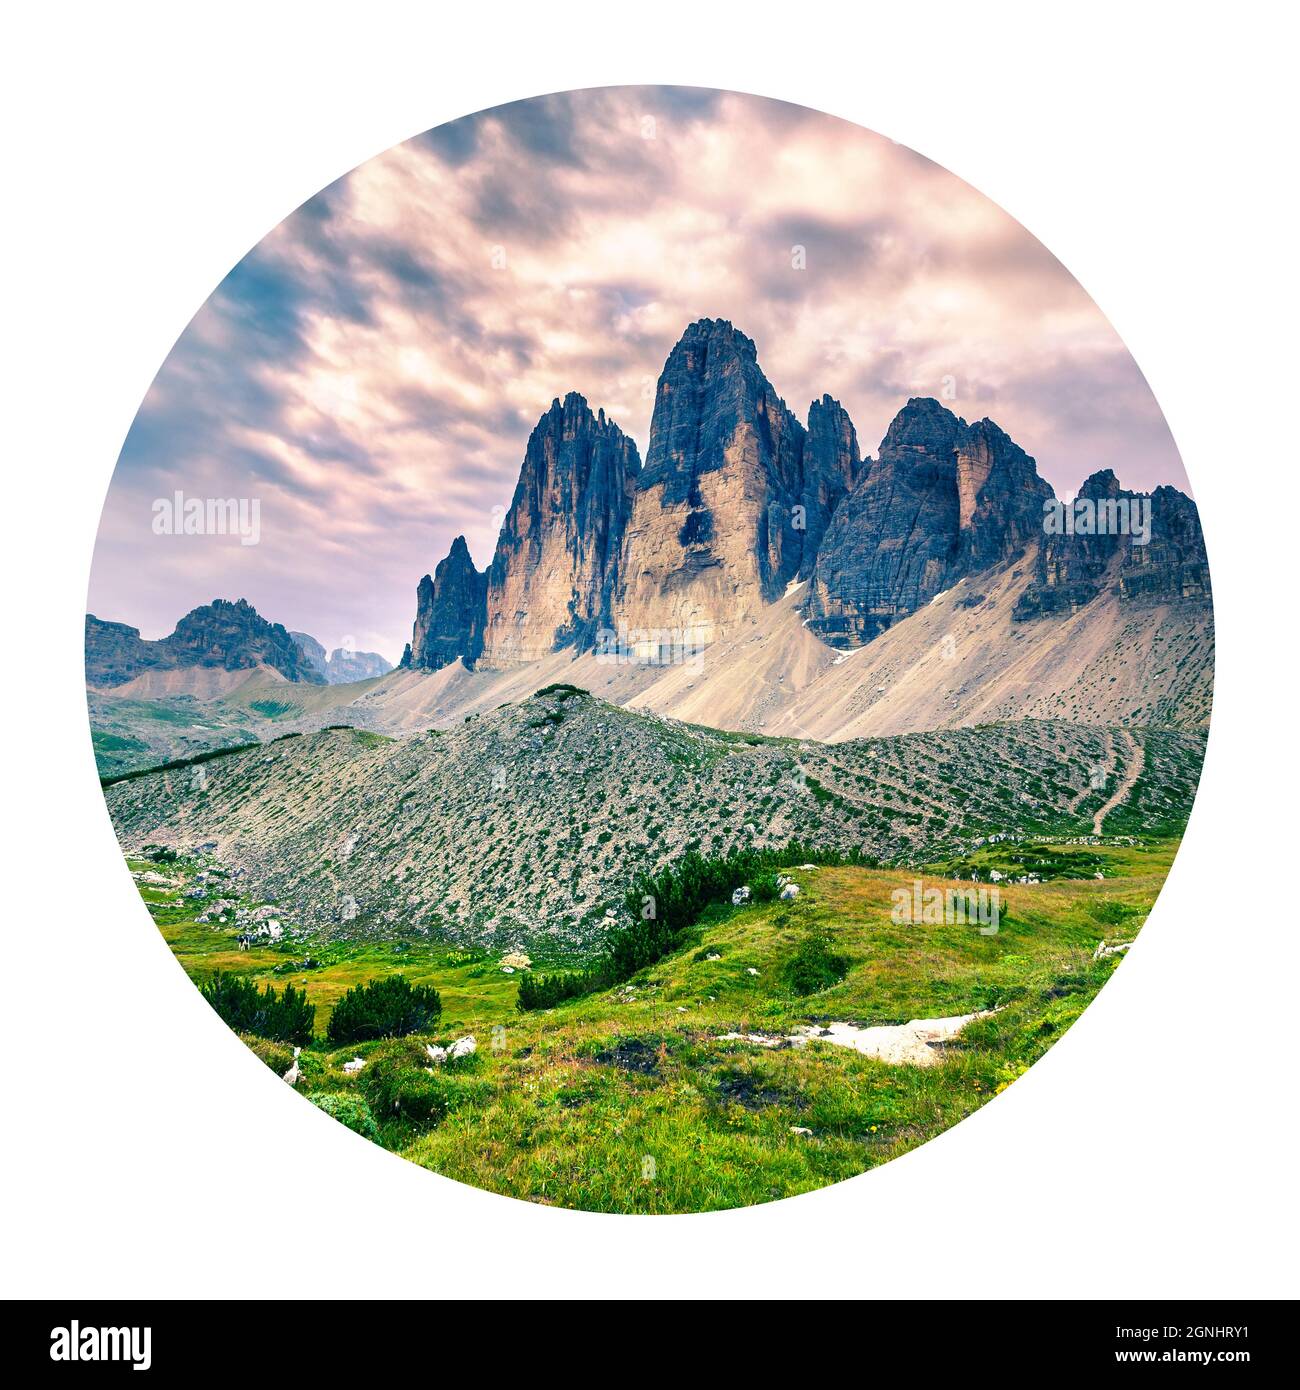 Round icon of nature with landscape. Fantastic summer view of National Park Tre Cime di Lavaredo. Great morning scene of Dolomite Alps, Italy, Europe. Stock Photo